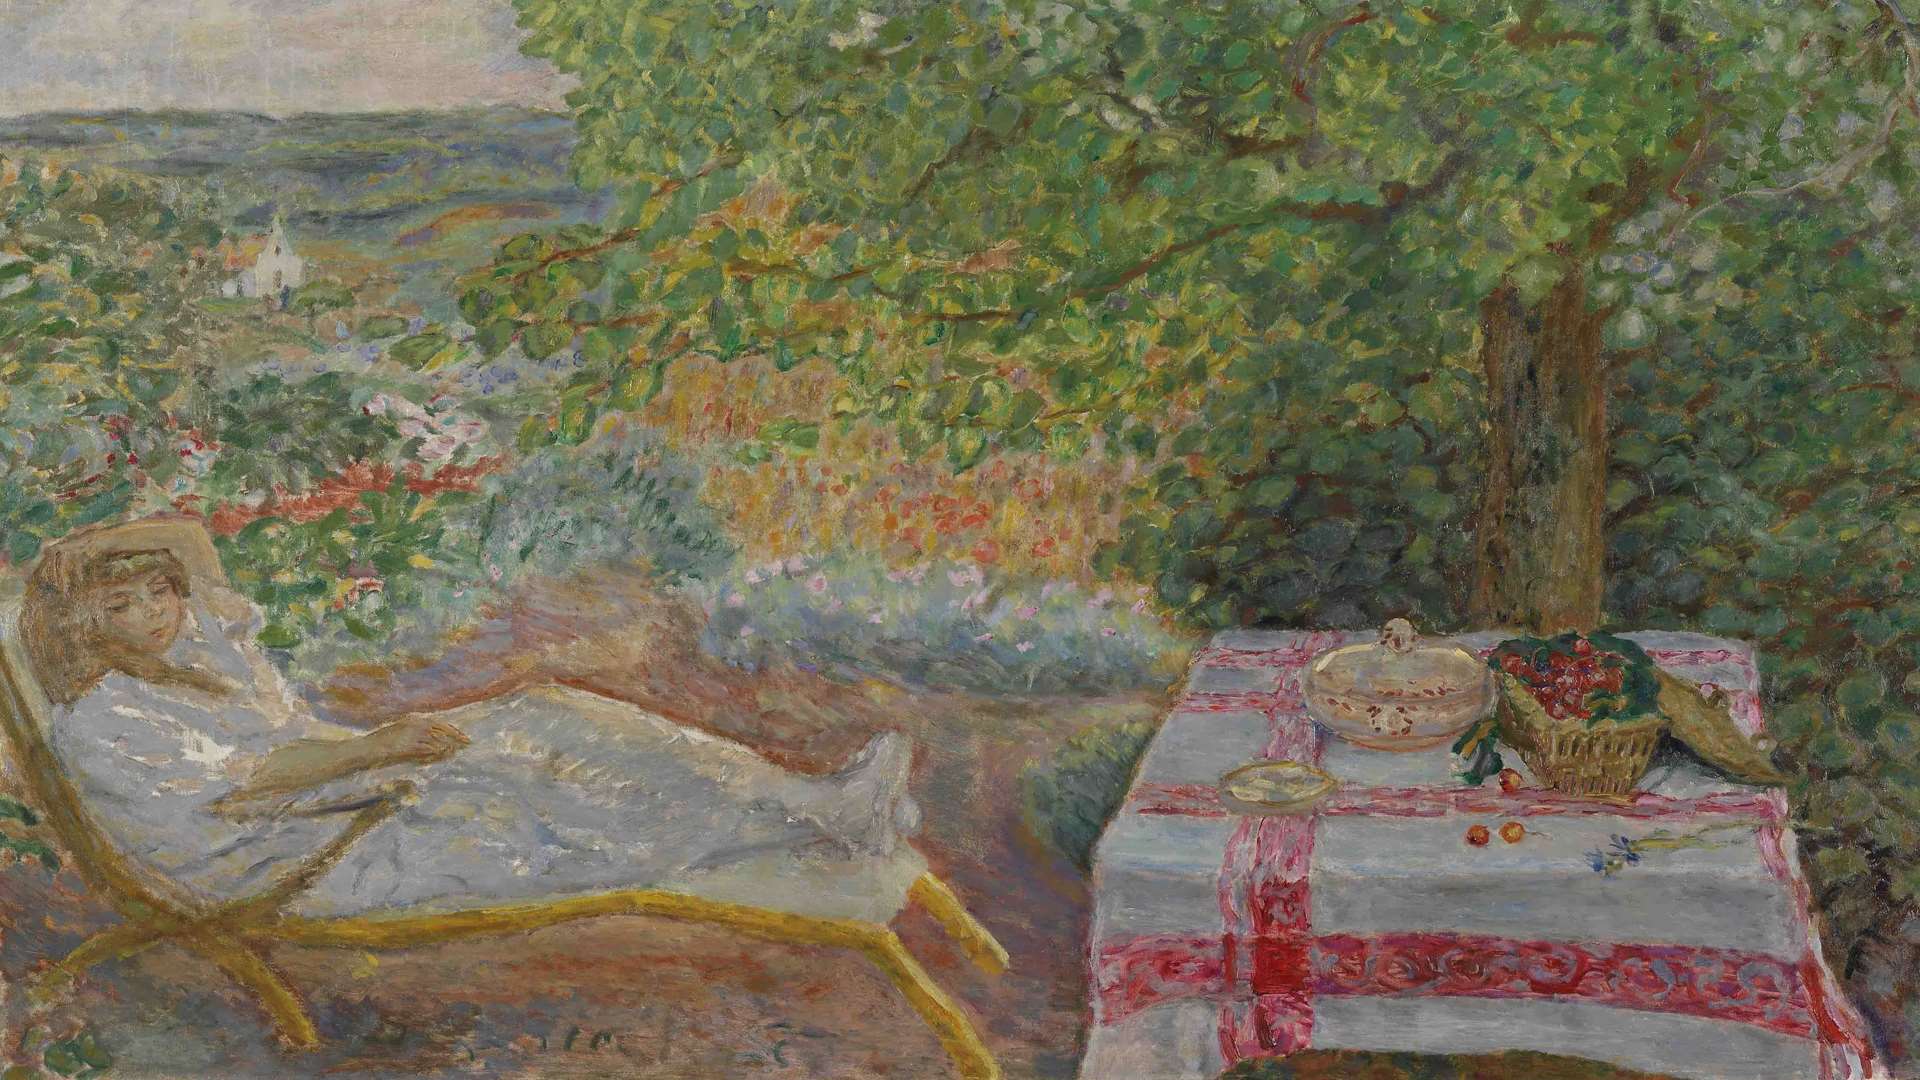 Resting in the Garden (Sieste au jardin), 1914 by Pierre Bonnard © The National Museum of Art, Architecture and Design, Oslo